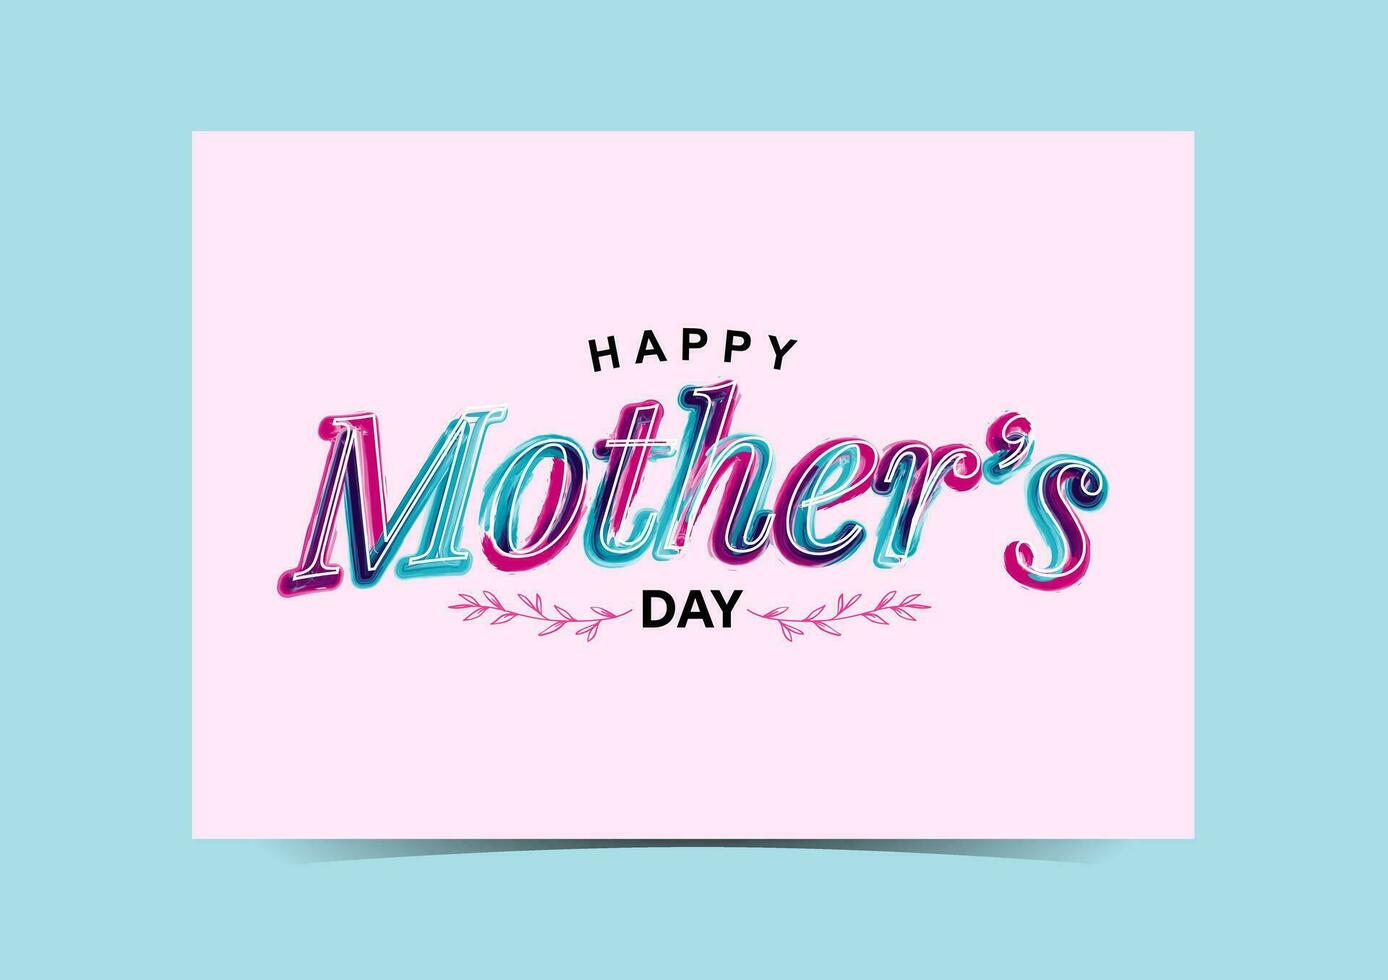 happy mothers day text in pink lettering on blue background vector